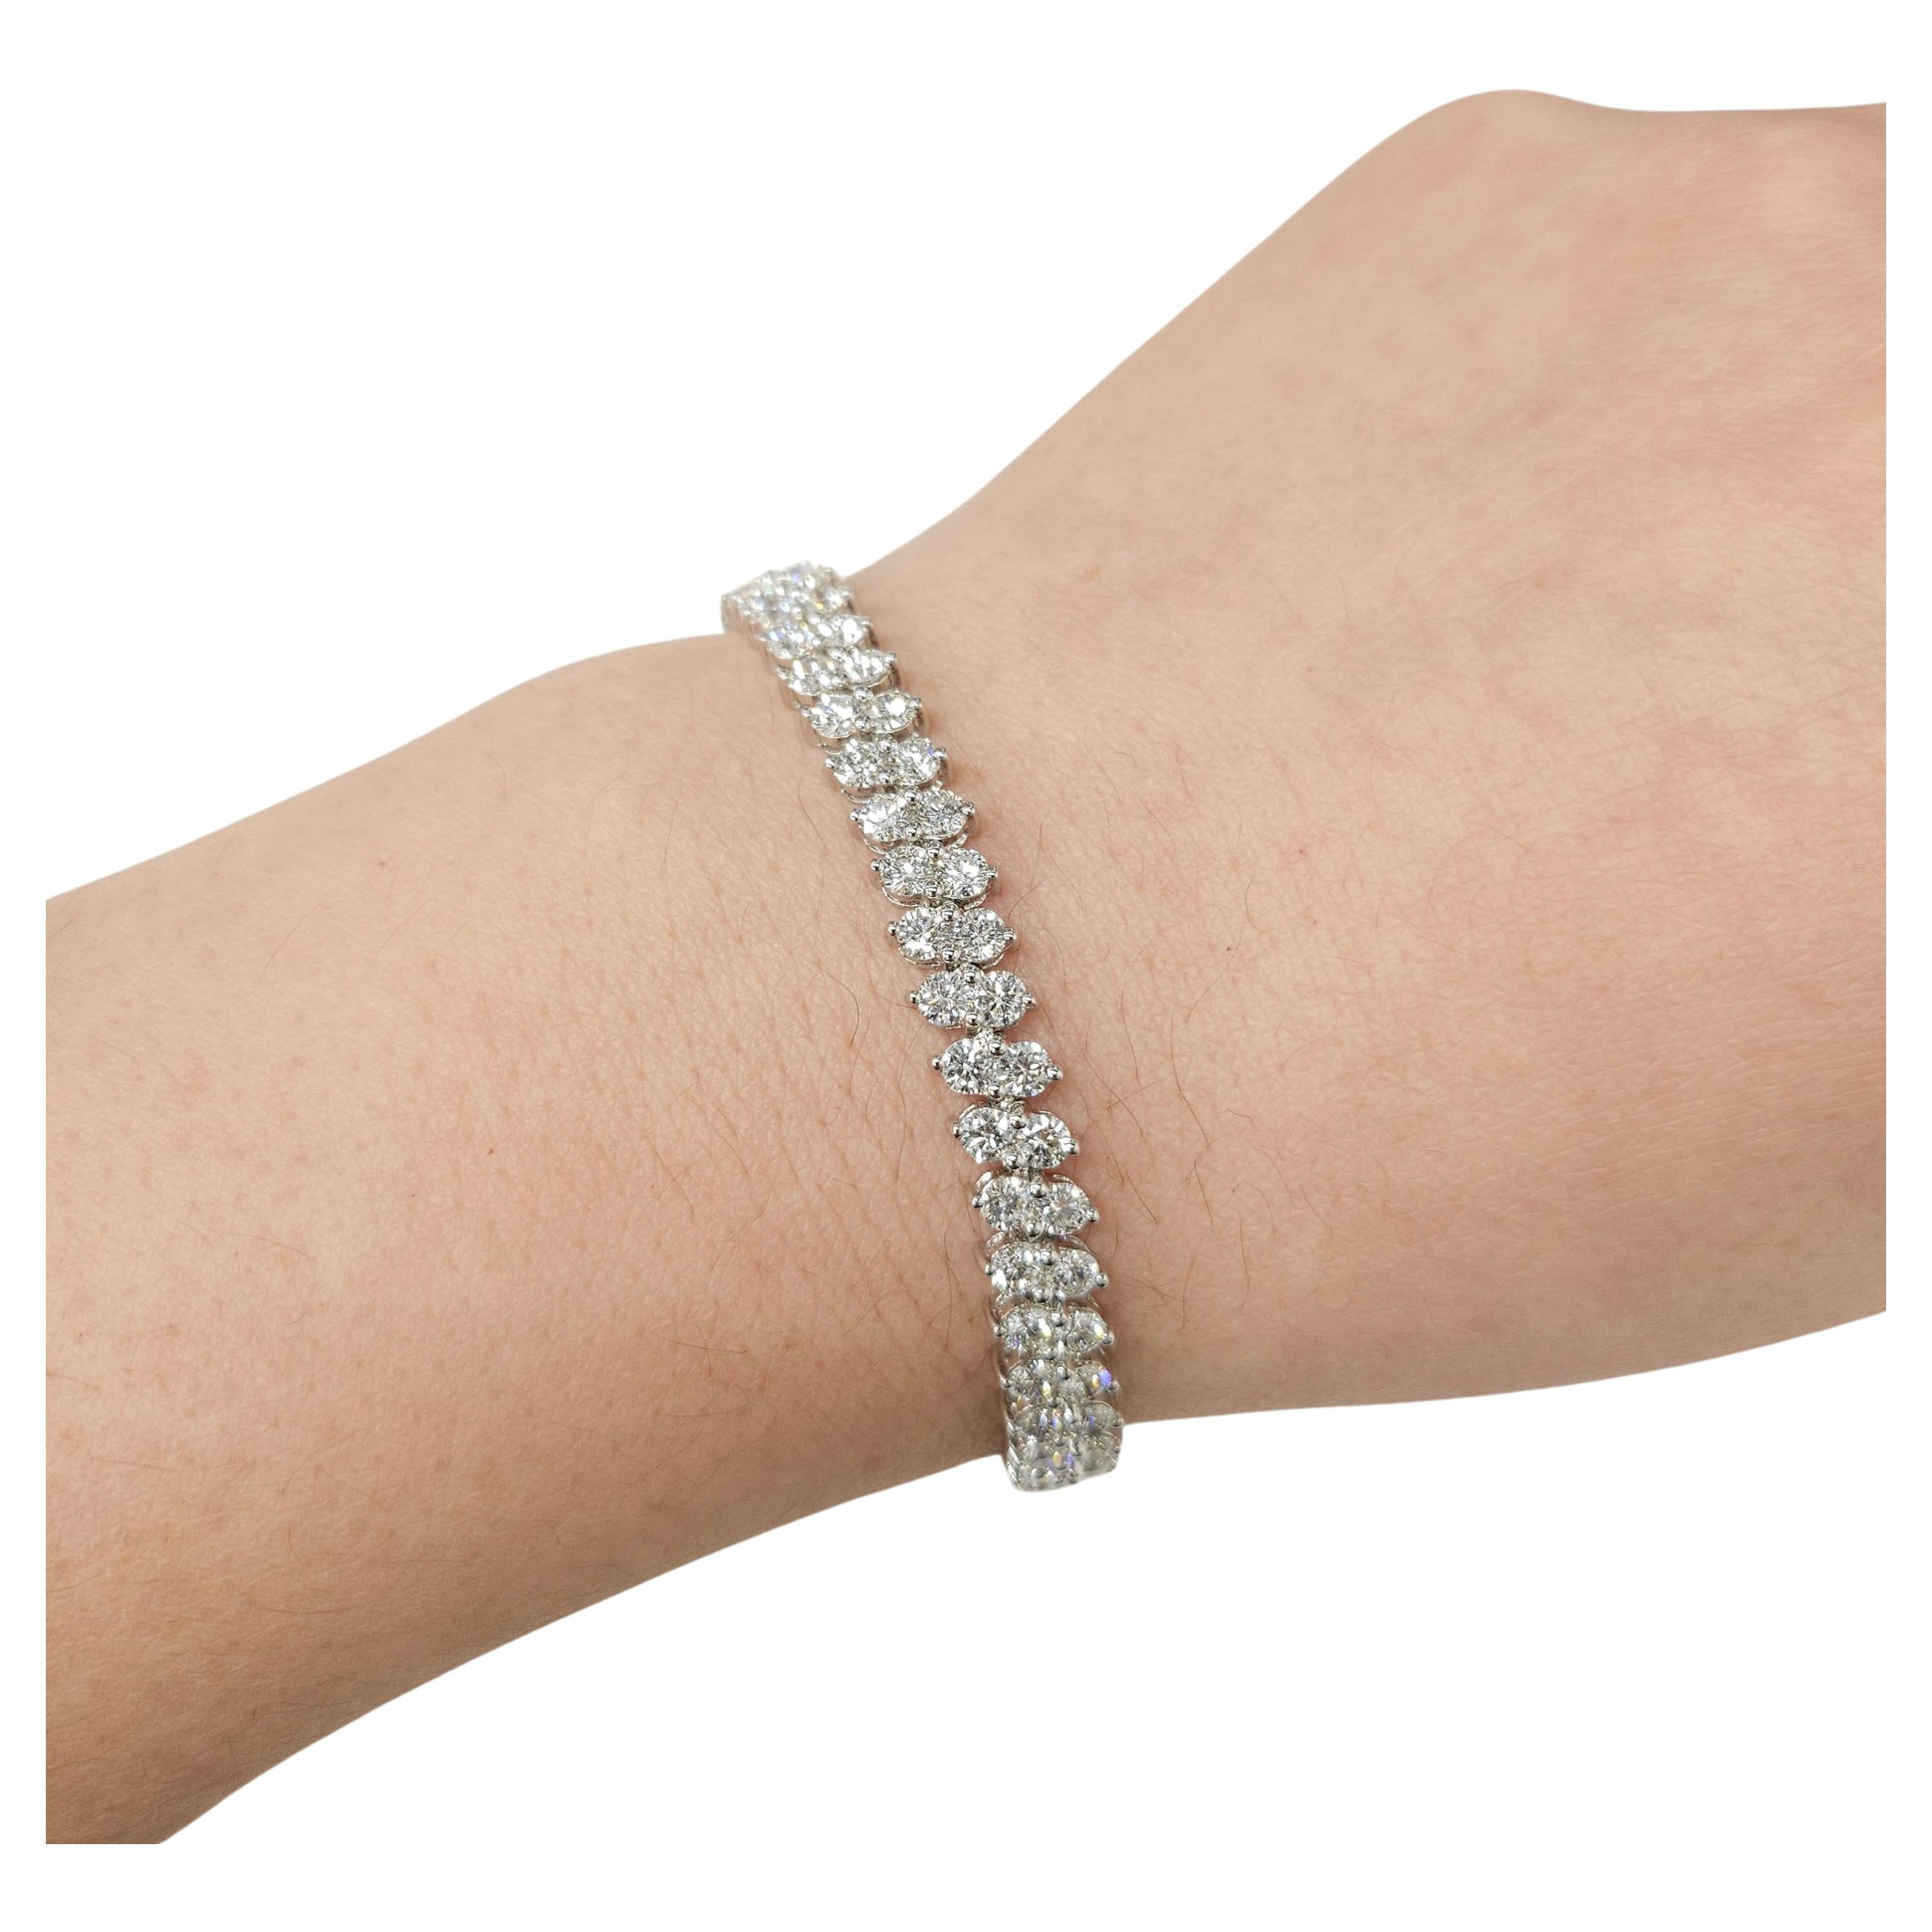 Enhance your wrist with the luxurious beauty of this exquisite 8.18 Carat Total Round Diamond Tennis Bracelet. Meticulously crafted in 18K white gold, this bracelet boasts a stunning double row design, epitomizing elegance and sophistication.

The